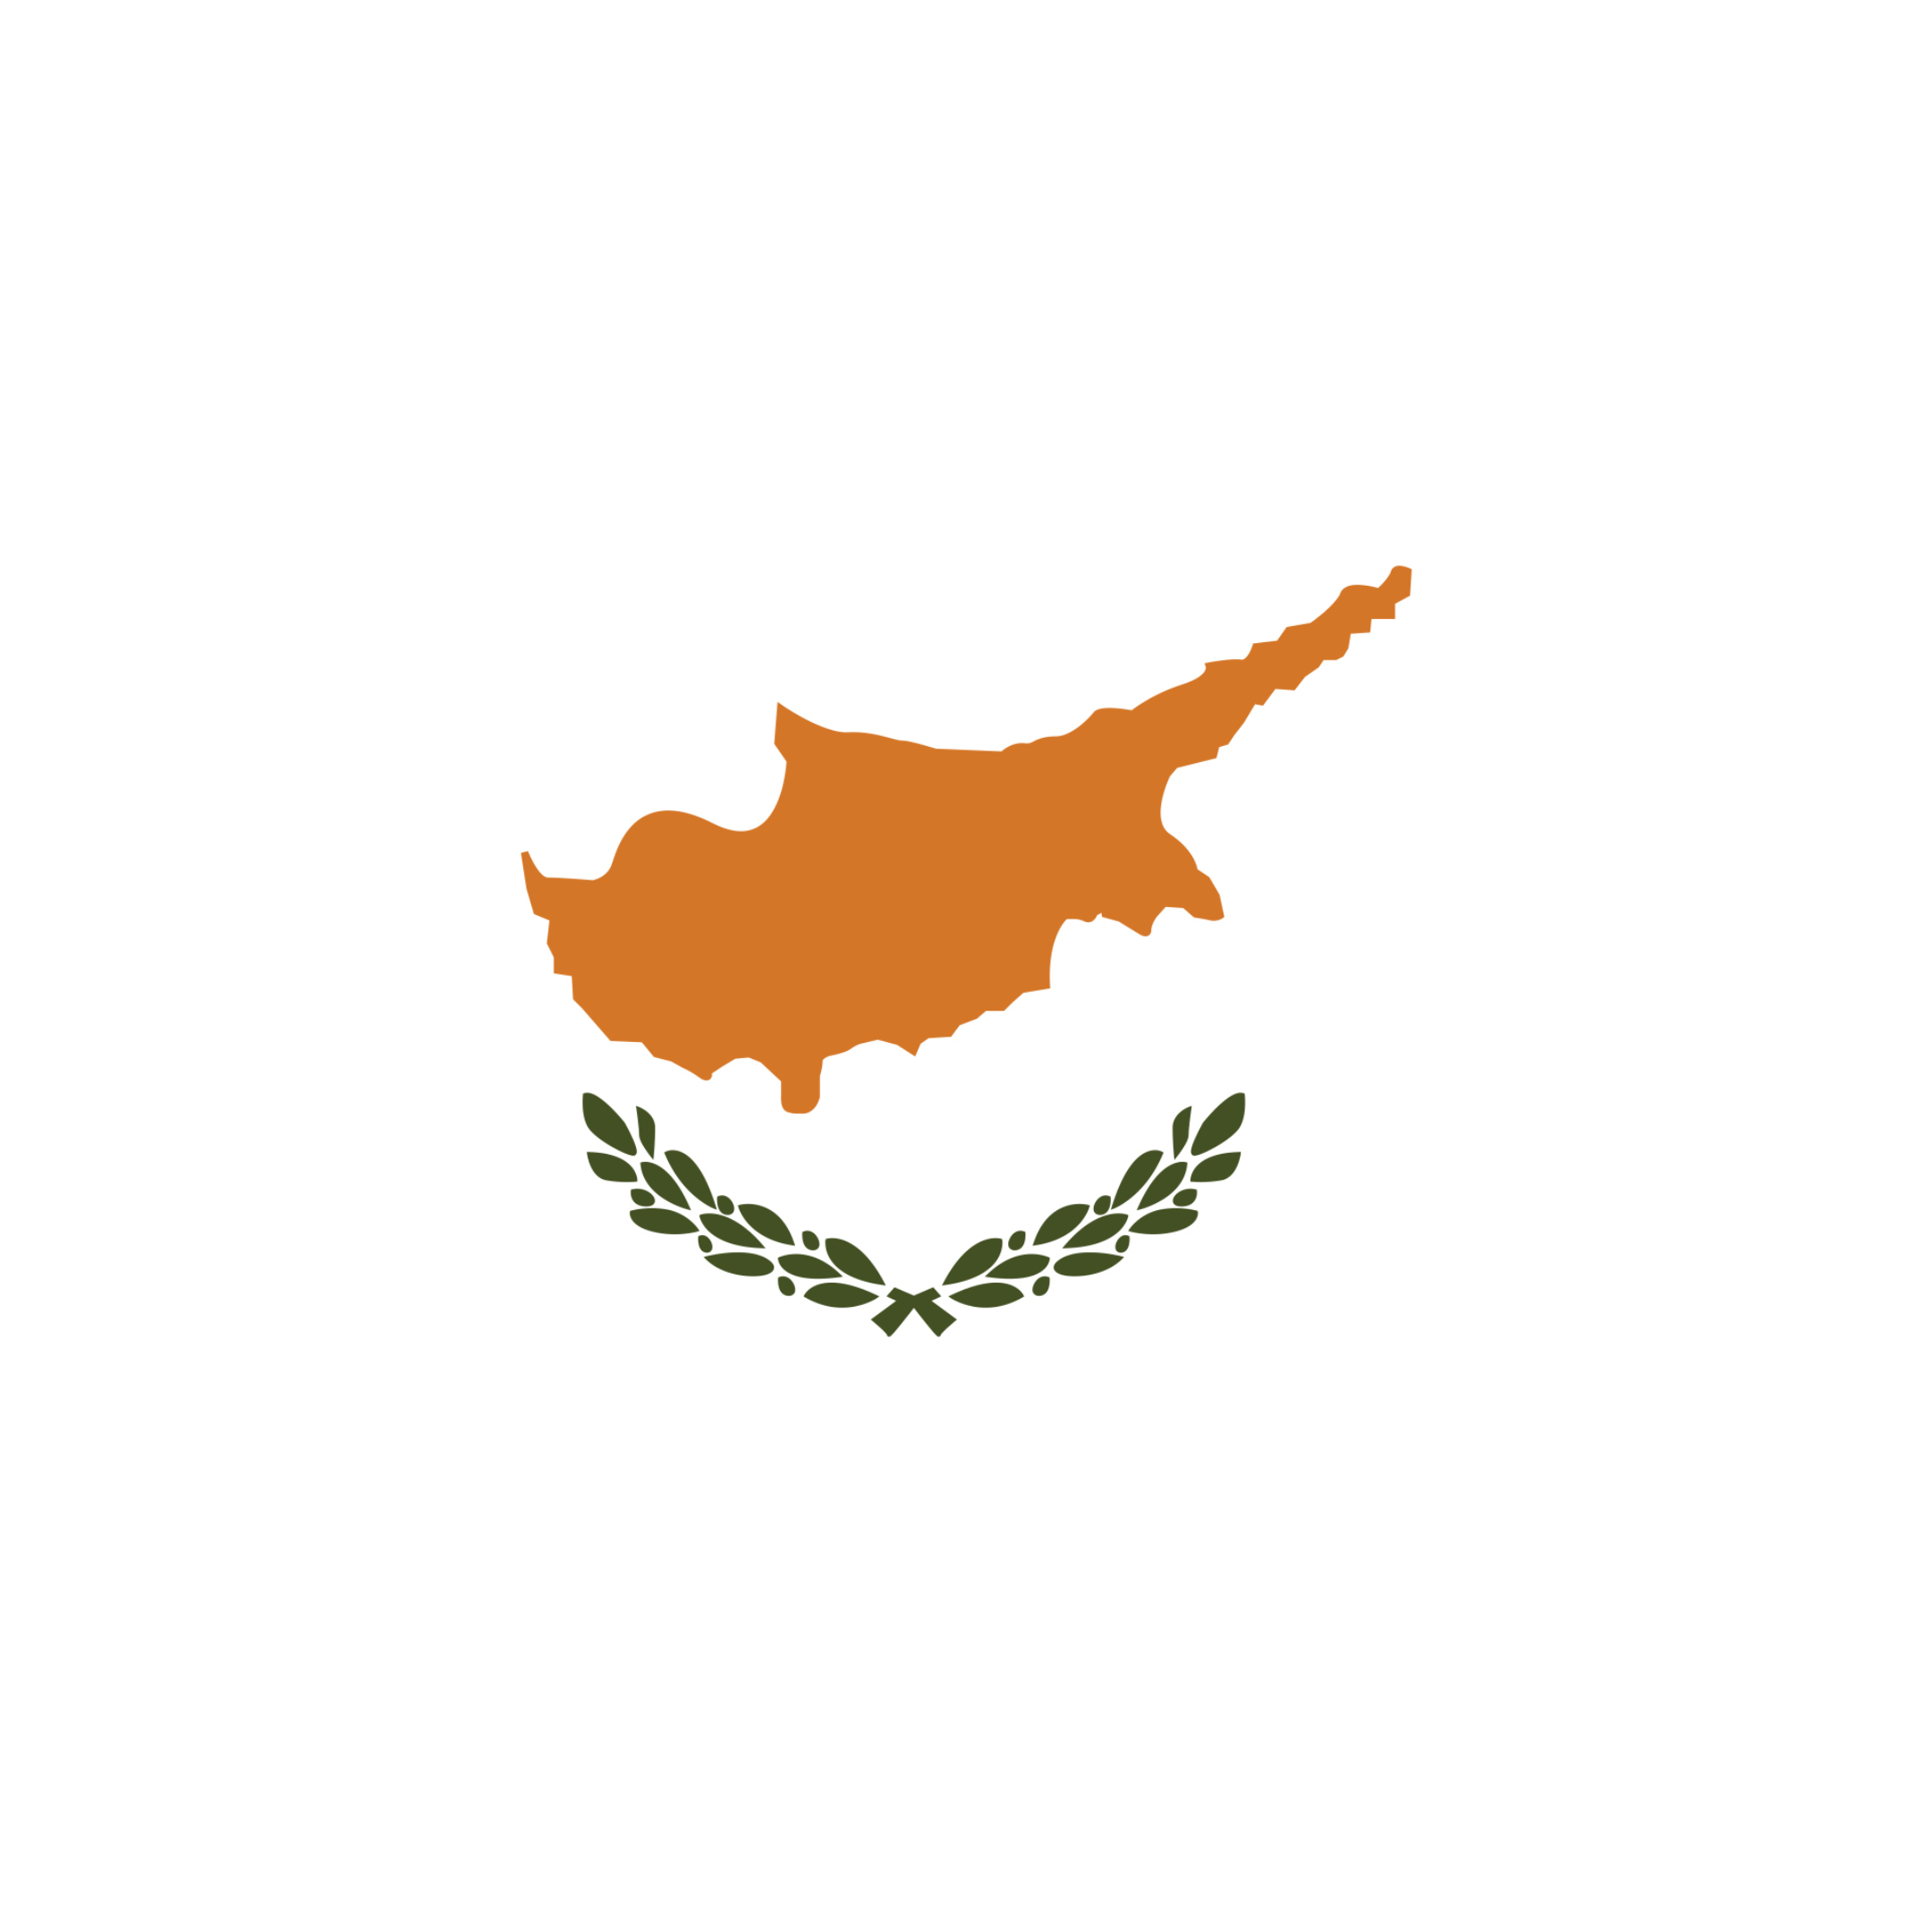 The flag of Cyprus has a white background with the shape of the island in the centre in copper, above two olive branches.